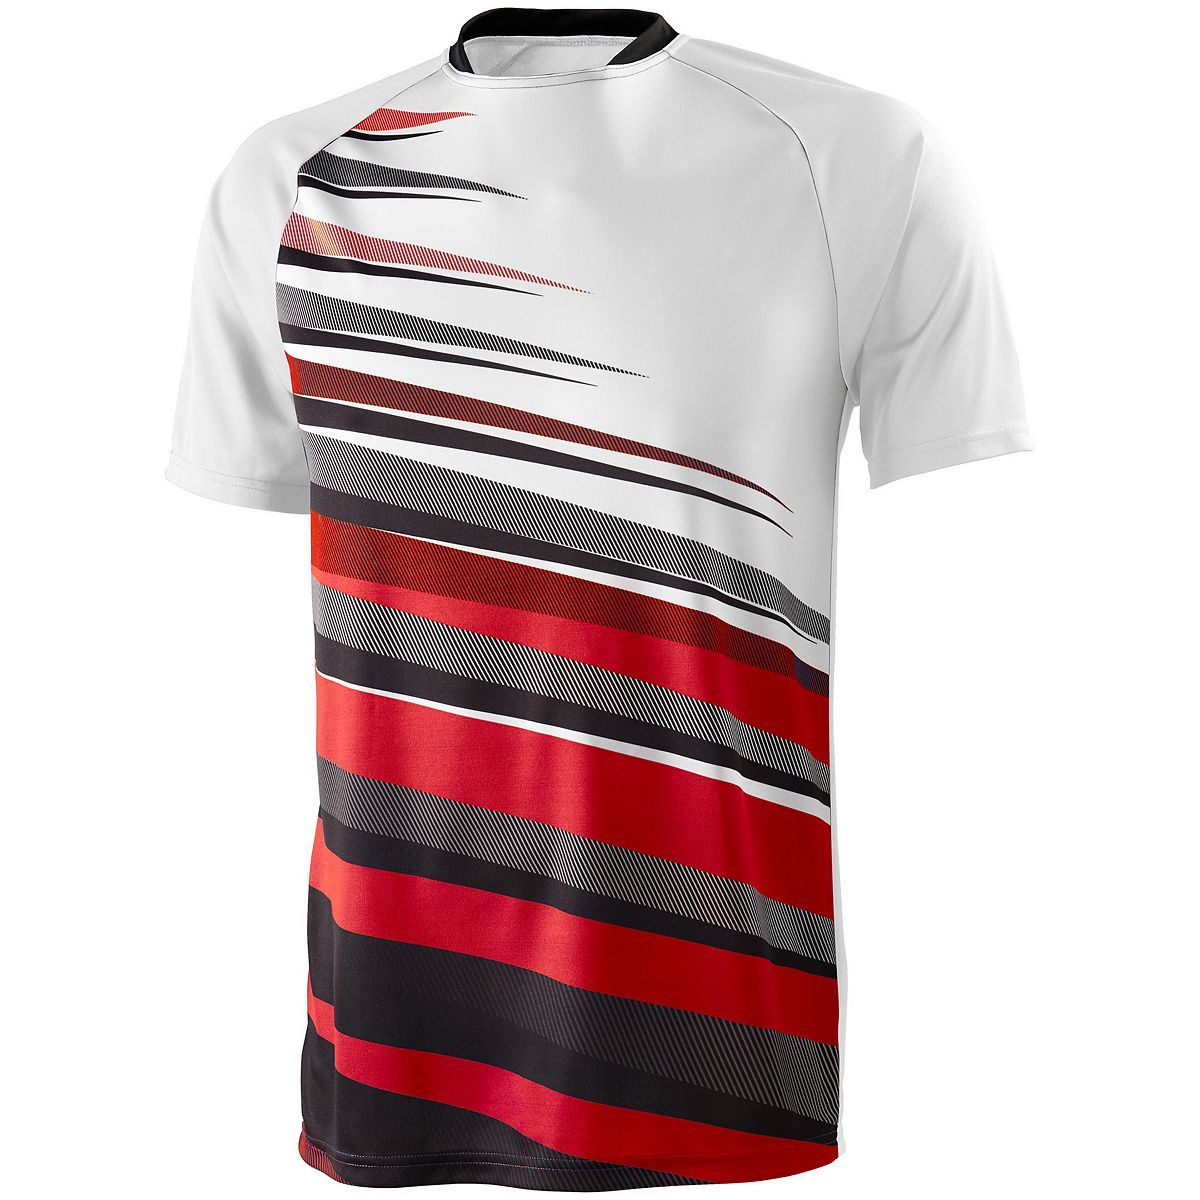 High 5 Youth Galactic Jersey in White/Black/Scarlet  -Part of the Youth, Youth-Jersey, High5-Products, Soccer, Shirts, All-Sports-1 product lines at KanaleyCreations.com